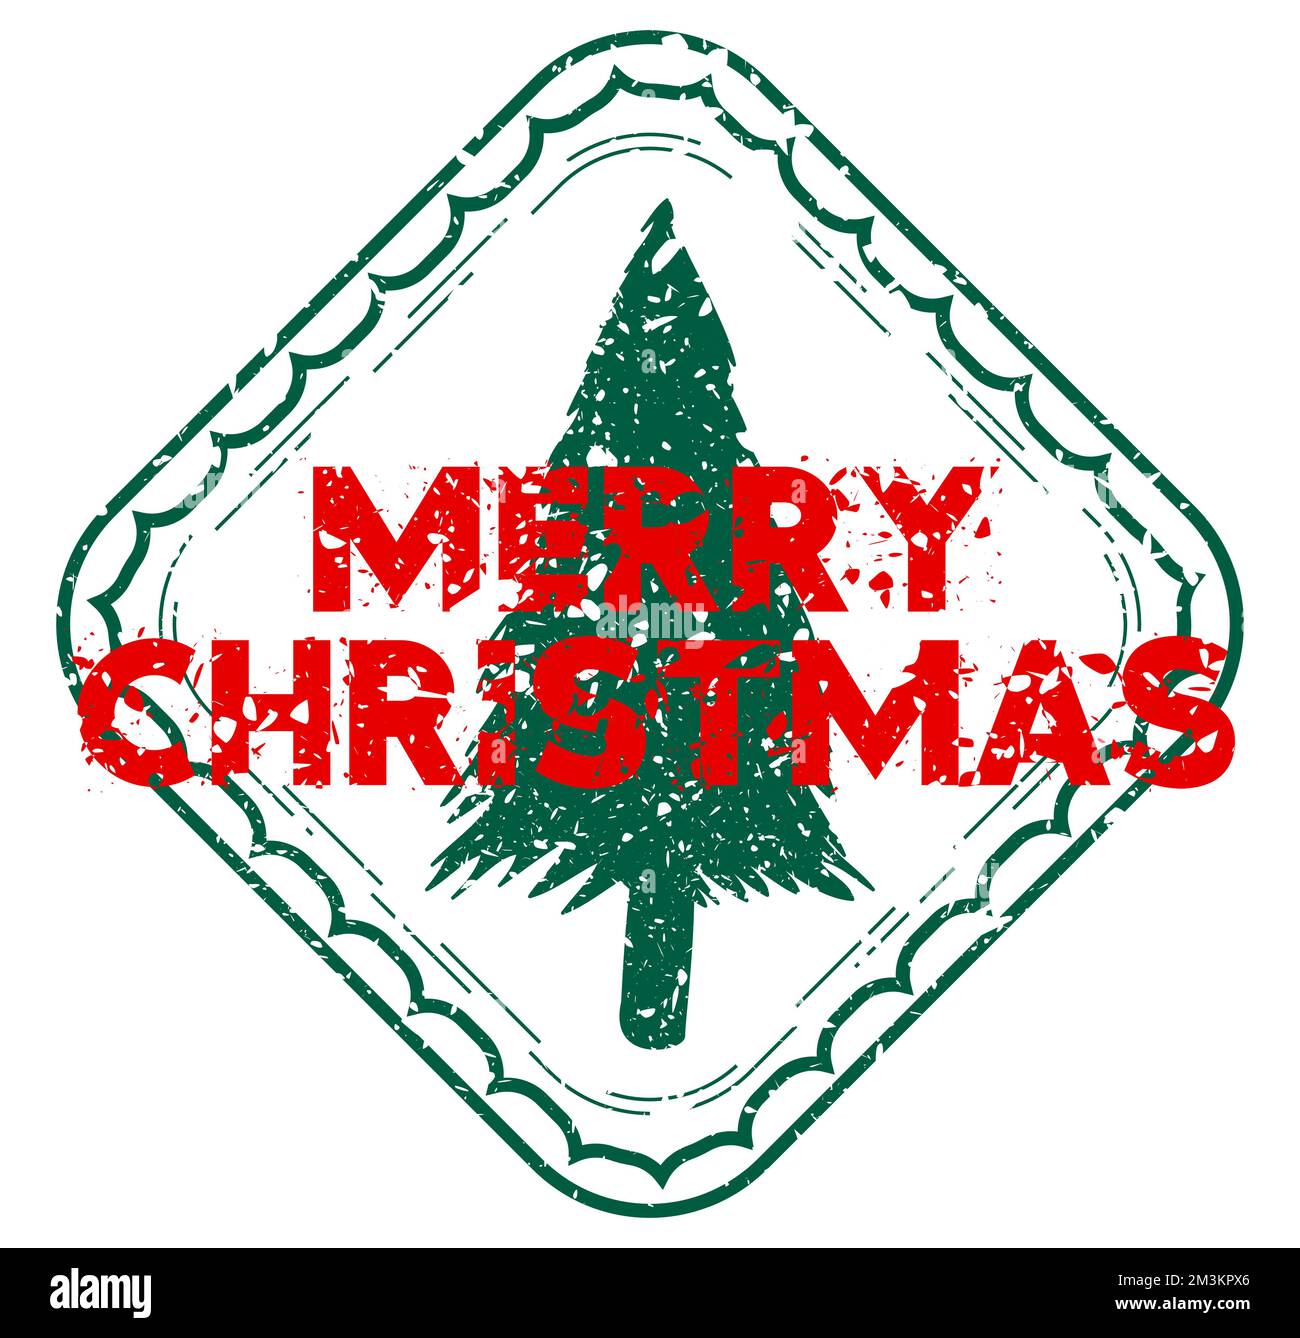 Simple vintage rubber stamp with Merry Christmas text. Stock Vector